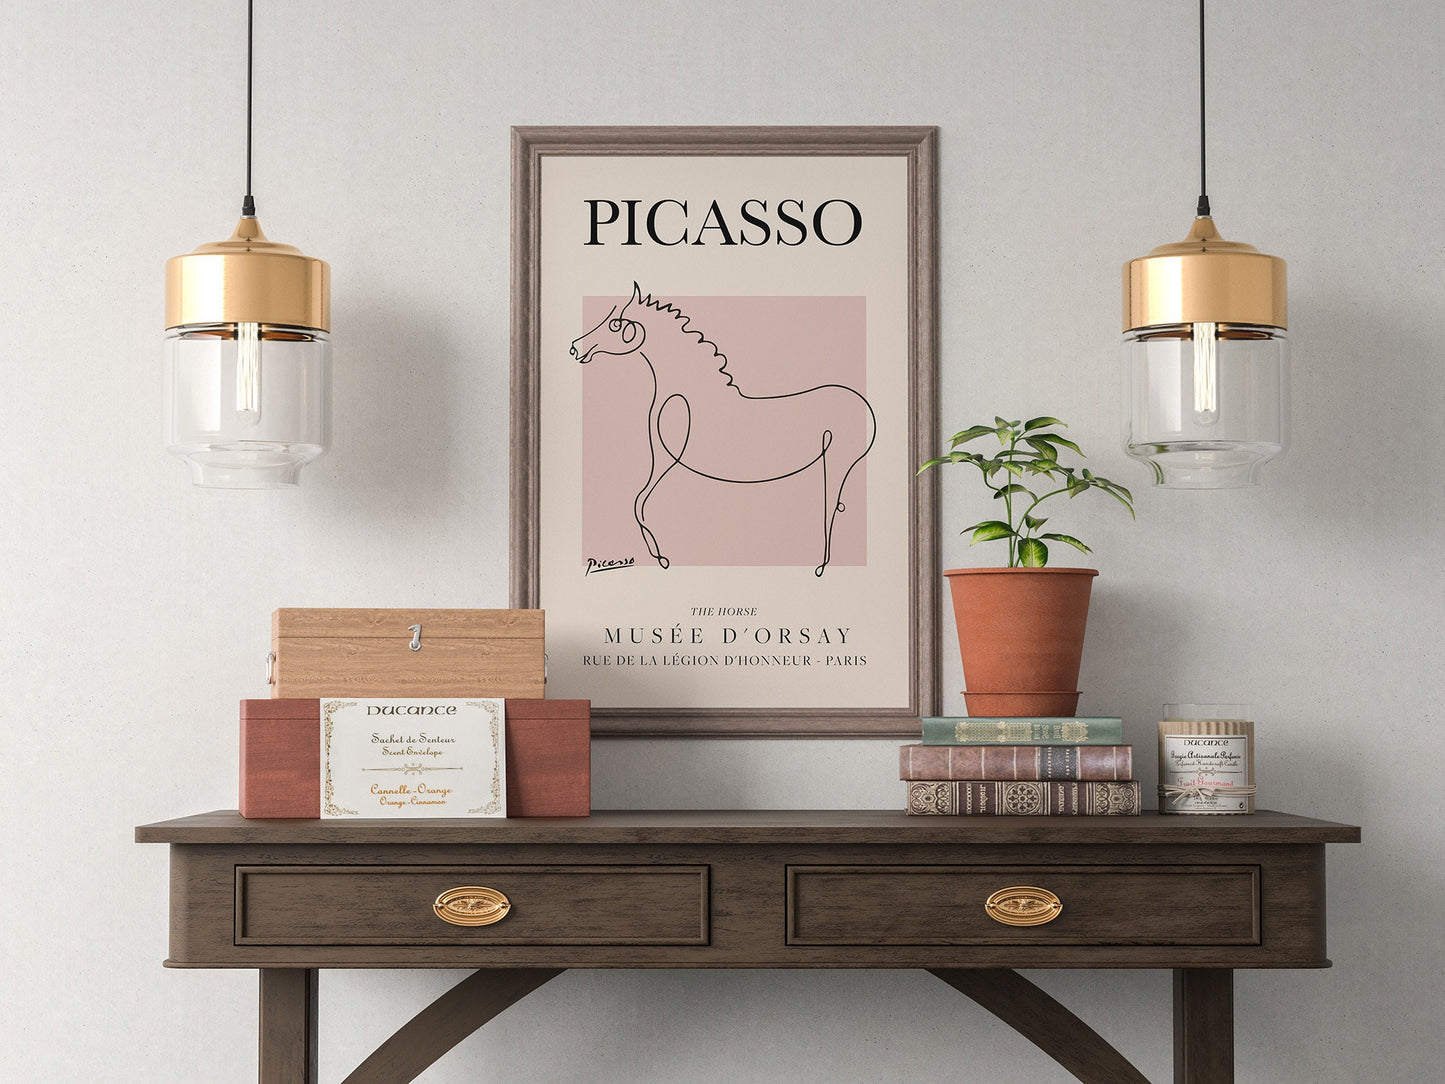 Picasso - Horse II Exhibition  Poster - Vintage Line Art Poster, Minimalist Line Drawing, Ideal Home Decor or Gift Print